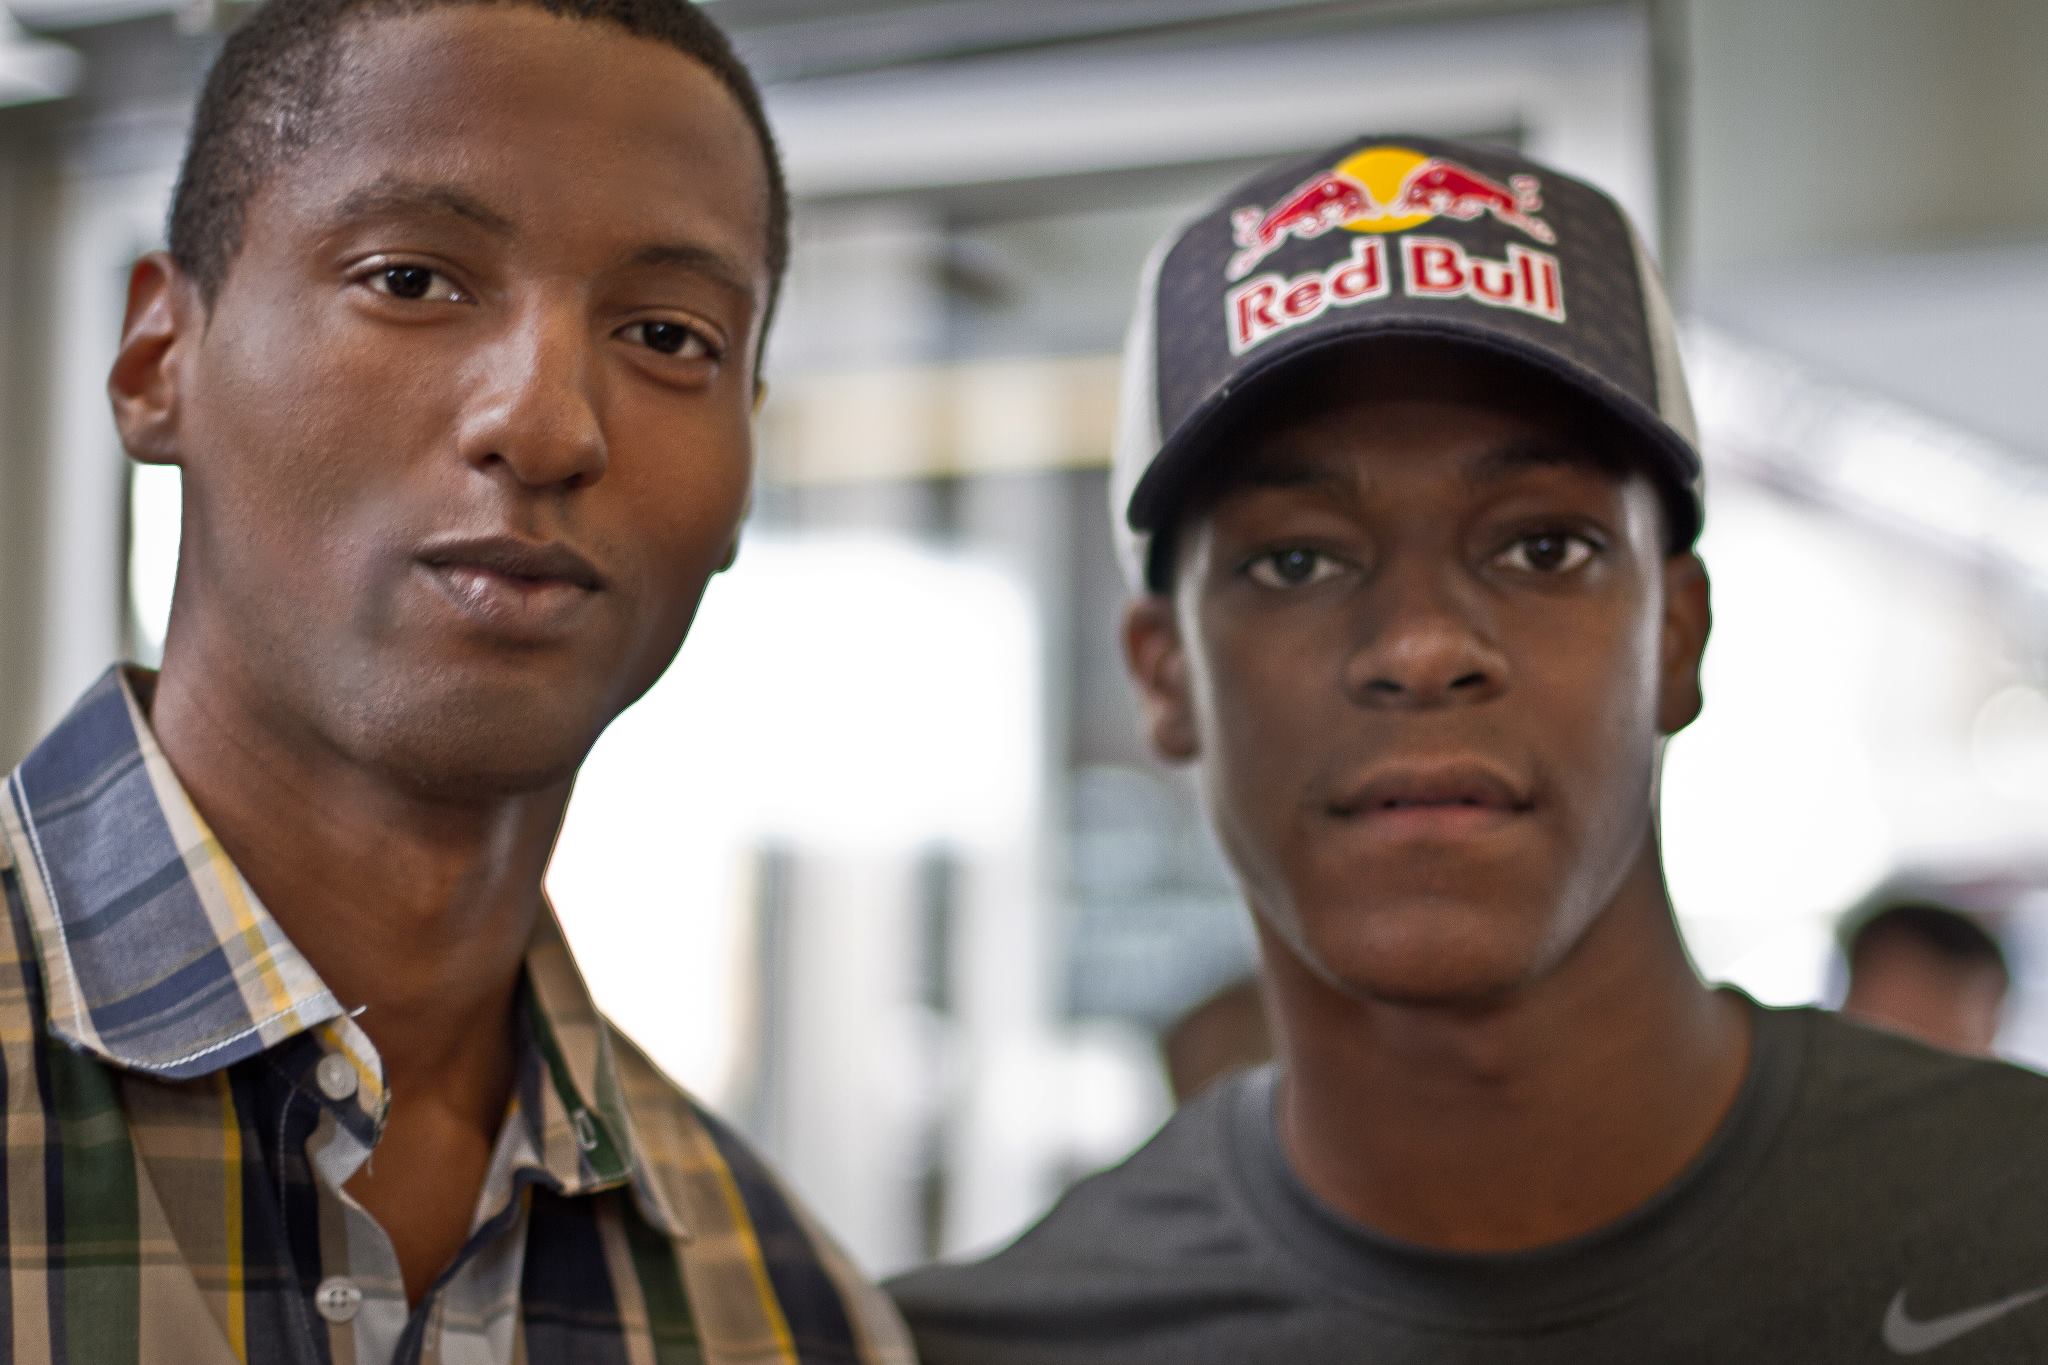 Rajon Rondo and Dee Shiver on set of Red Bull Commercial